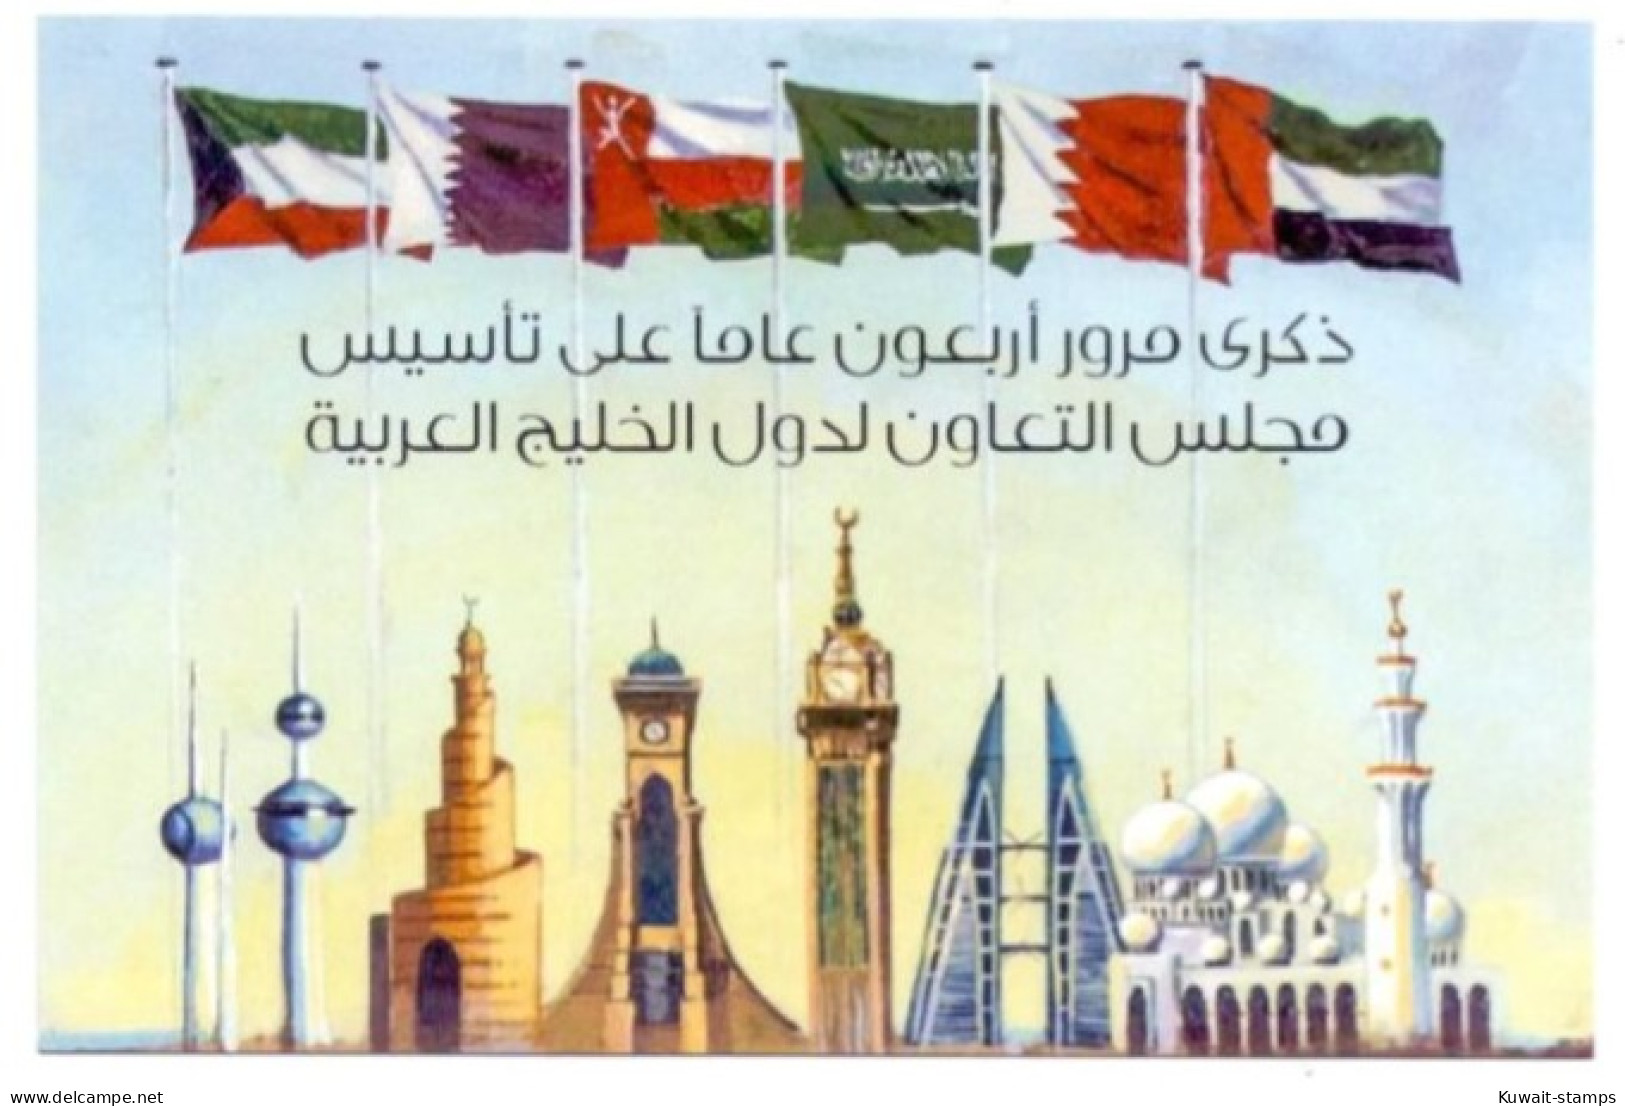 Kuwait 2022 - Official Postcard  Stamp Image Of Kuwait Joint Issues 40th Anniversary Of G.C.C 2022 - Koweït